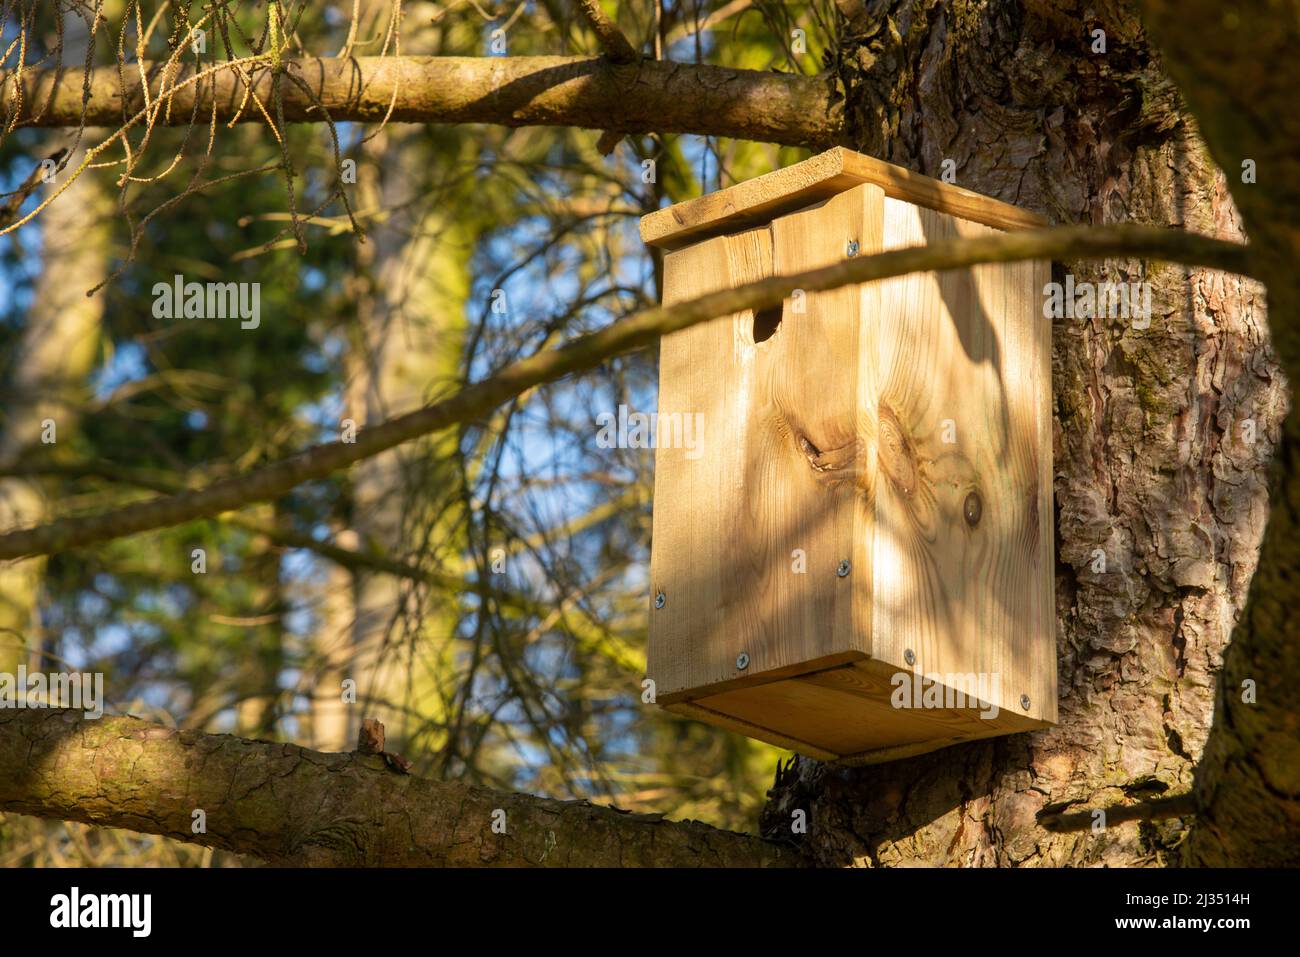 wooden bird nest at against tree trunk Stock Photo